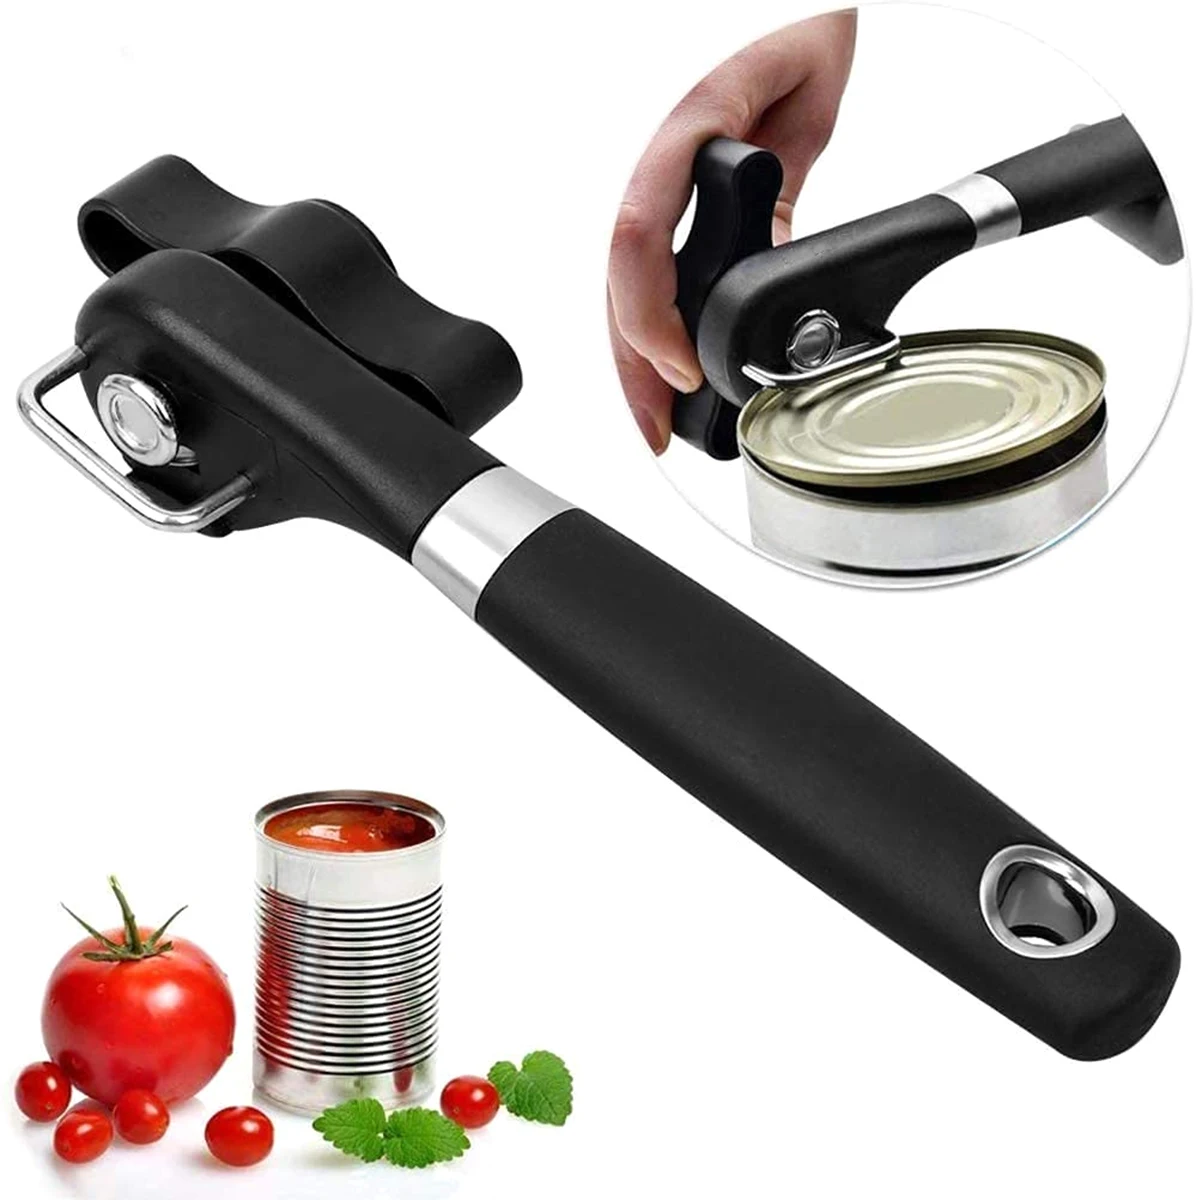 

Manual Can Openers with Non-Slip Handle and Ergonomic Turning Knob Stainless Steel Hand-held Can Openers Safe Cut Tin Lids Jar